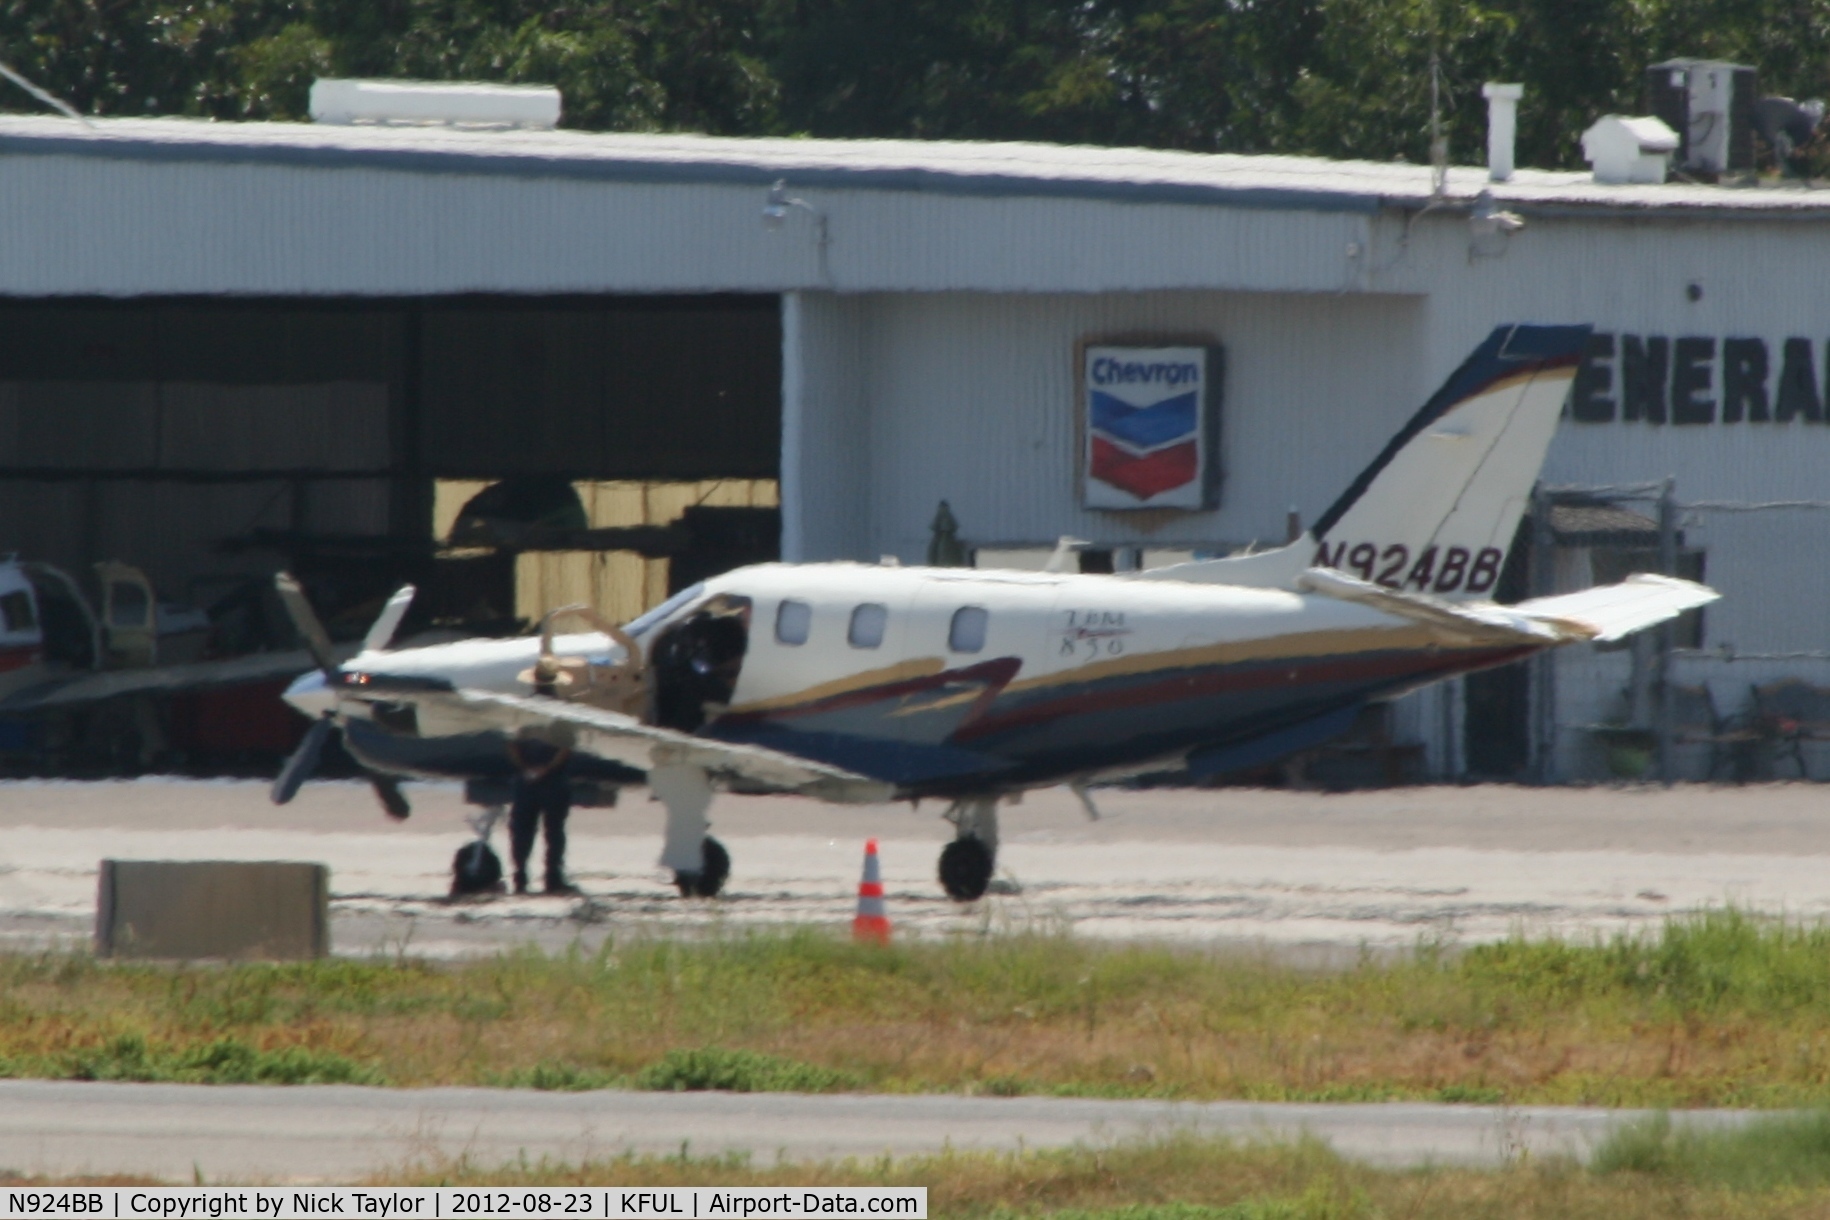 N924BB, 2007 Socata TBM-700 C/N 405, Parked on the south side